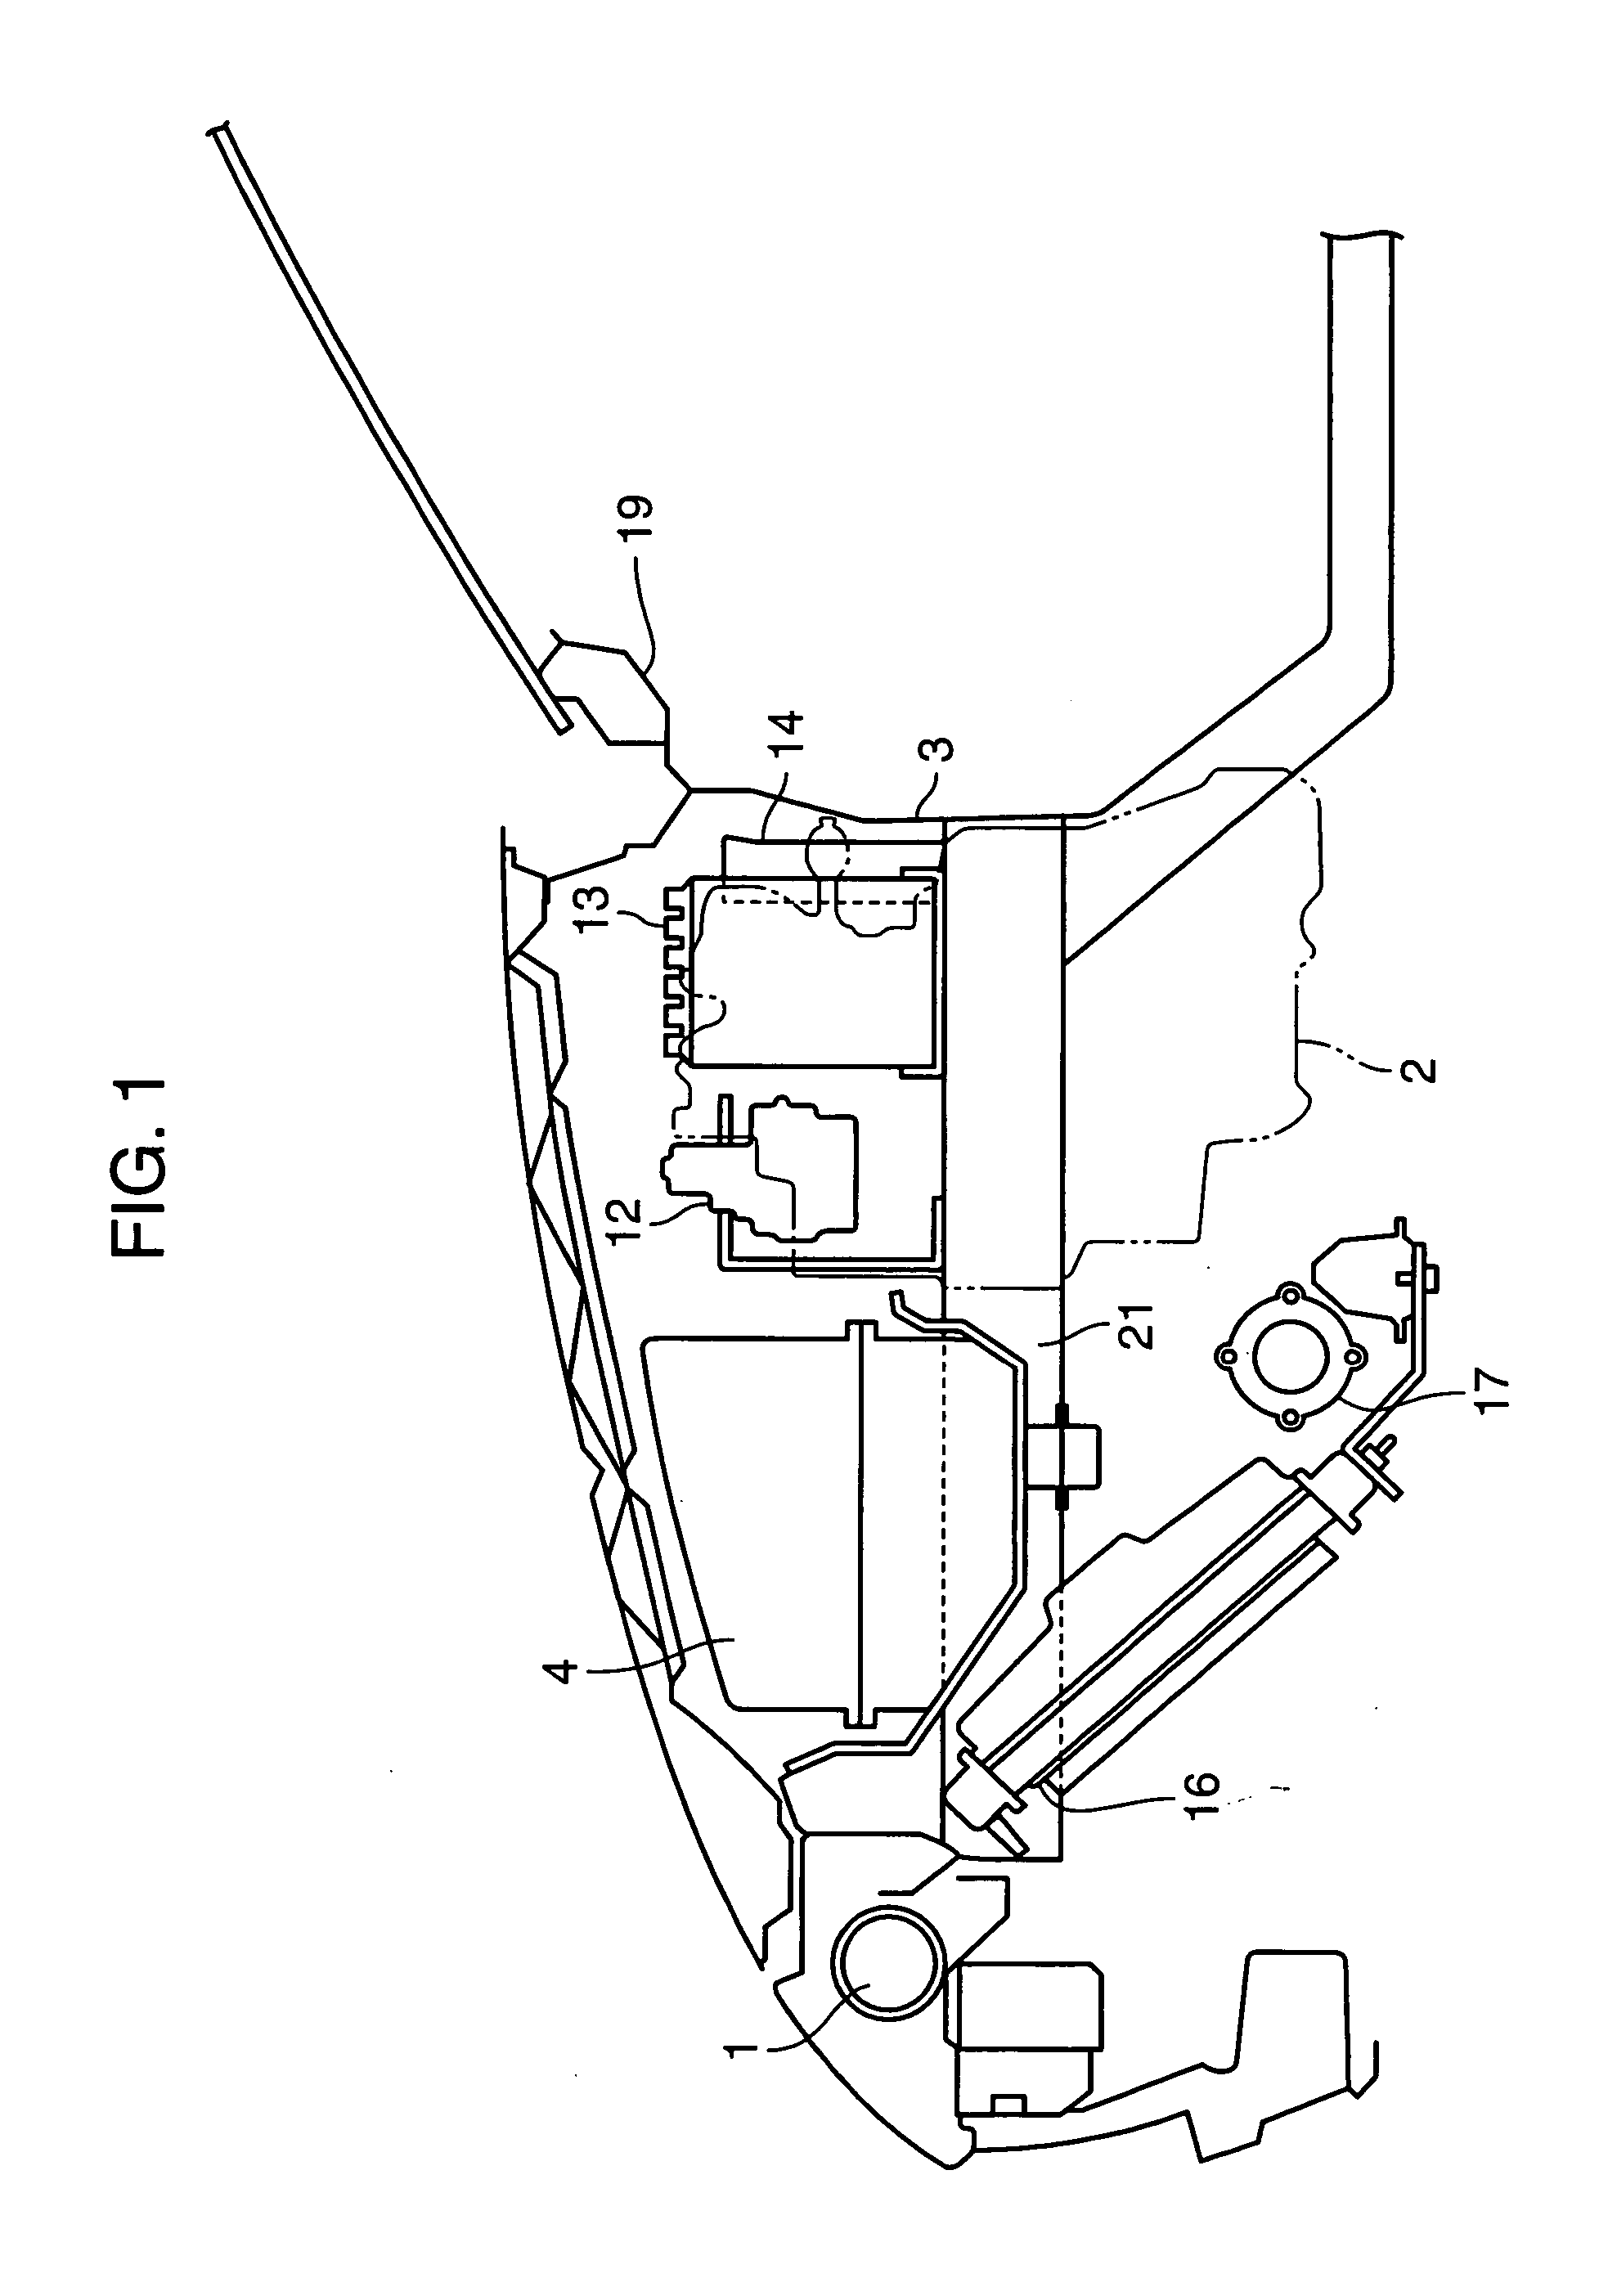 Structure for arrangement of engine-associated vehicle components